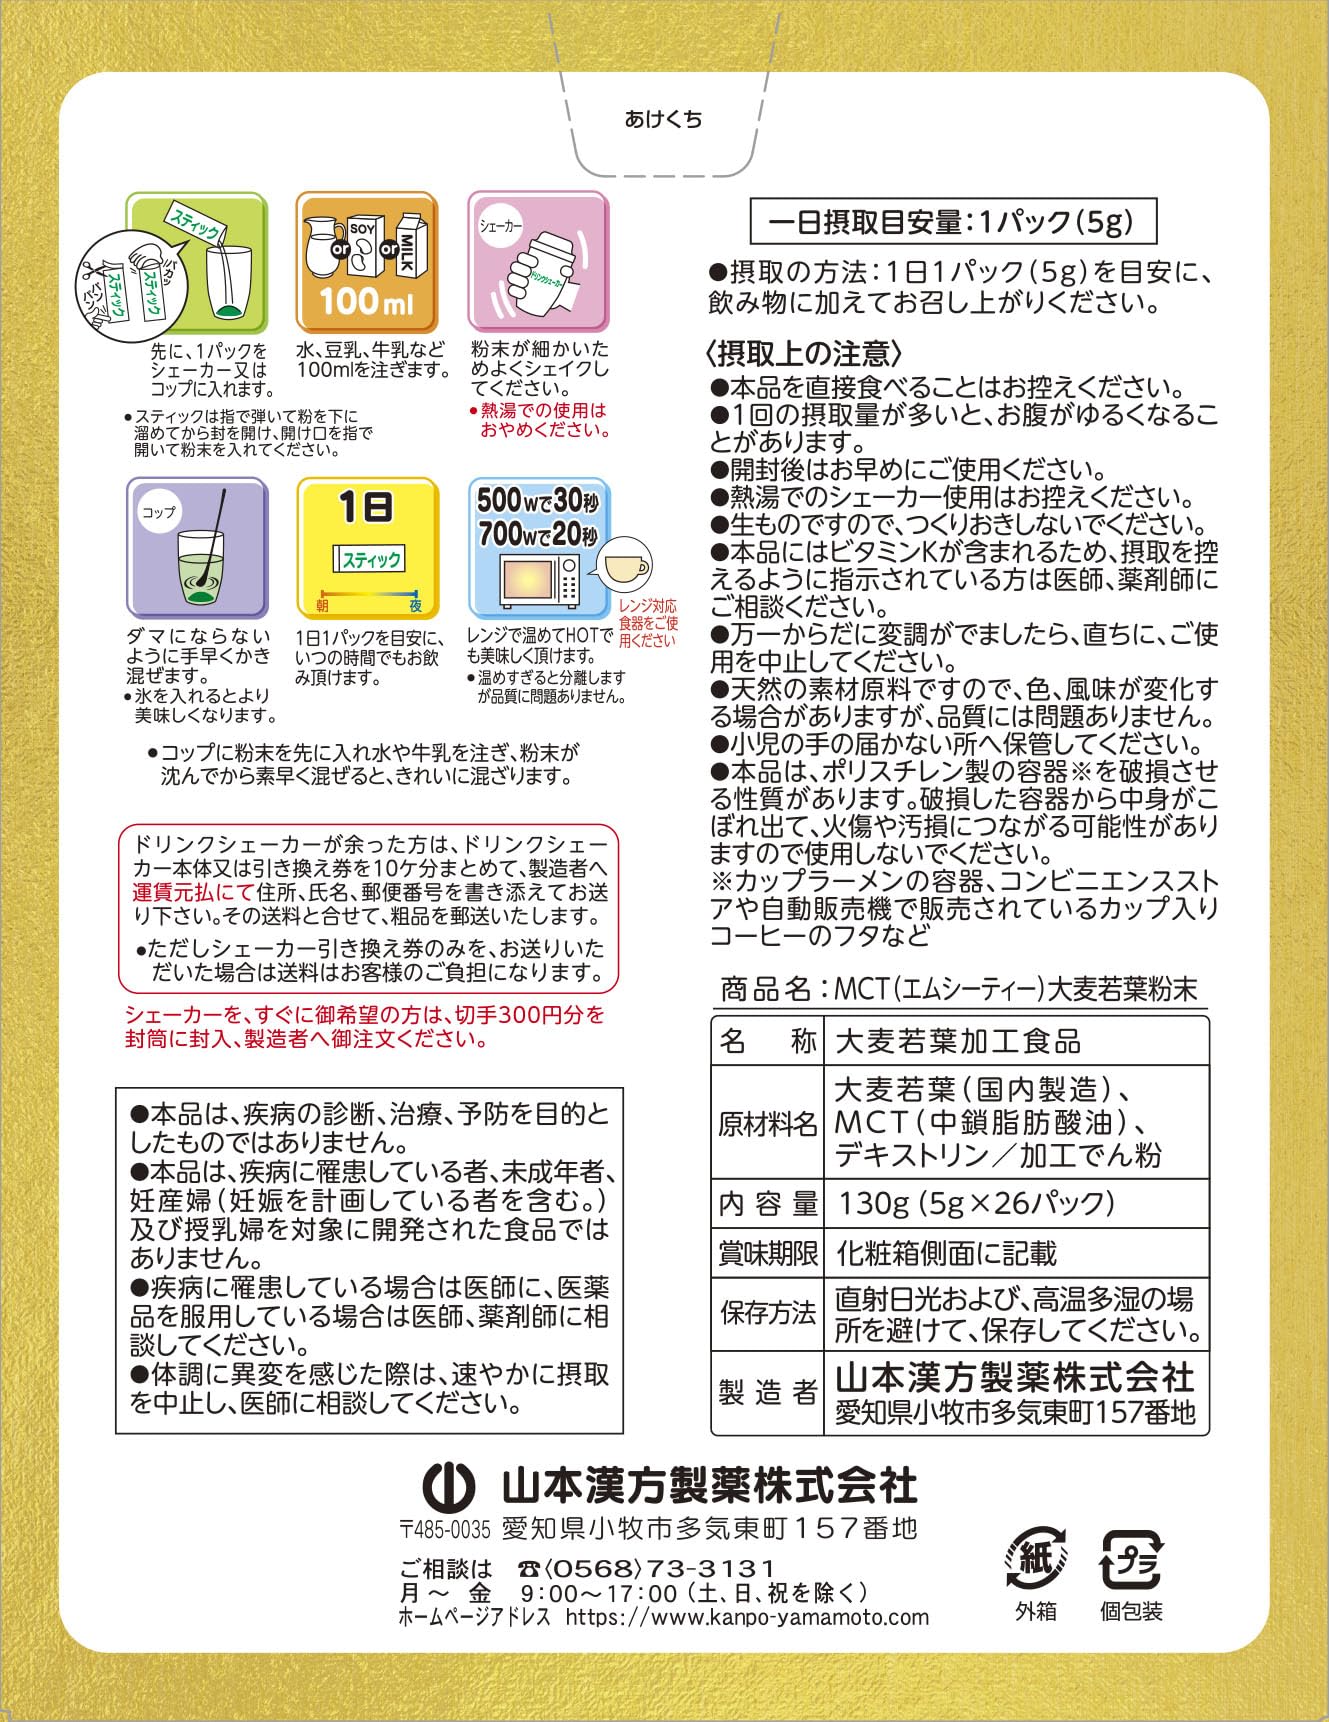 [Food with Functional Claims] Yamamoto Kampo Pharmaceutical MCT Barley Grass Powder 5g x 26 packets